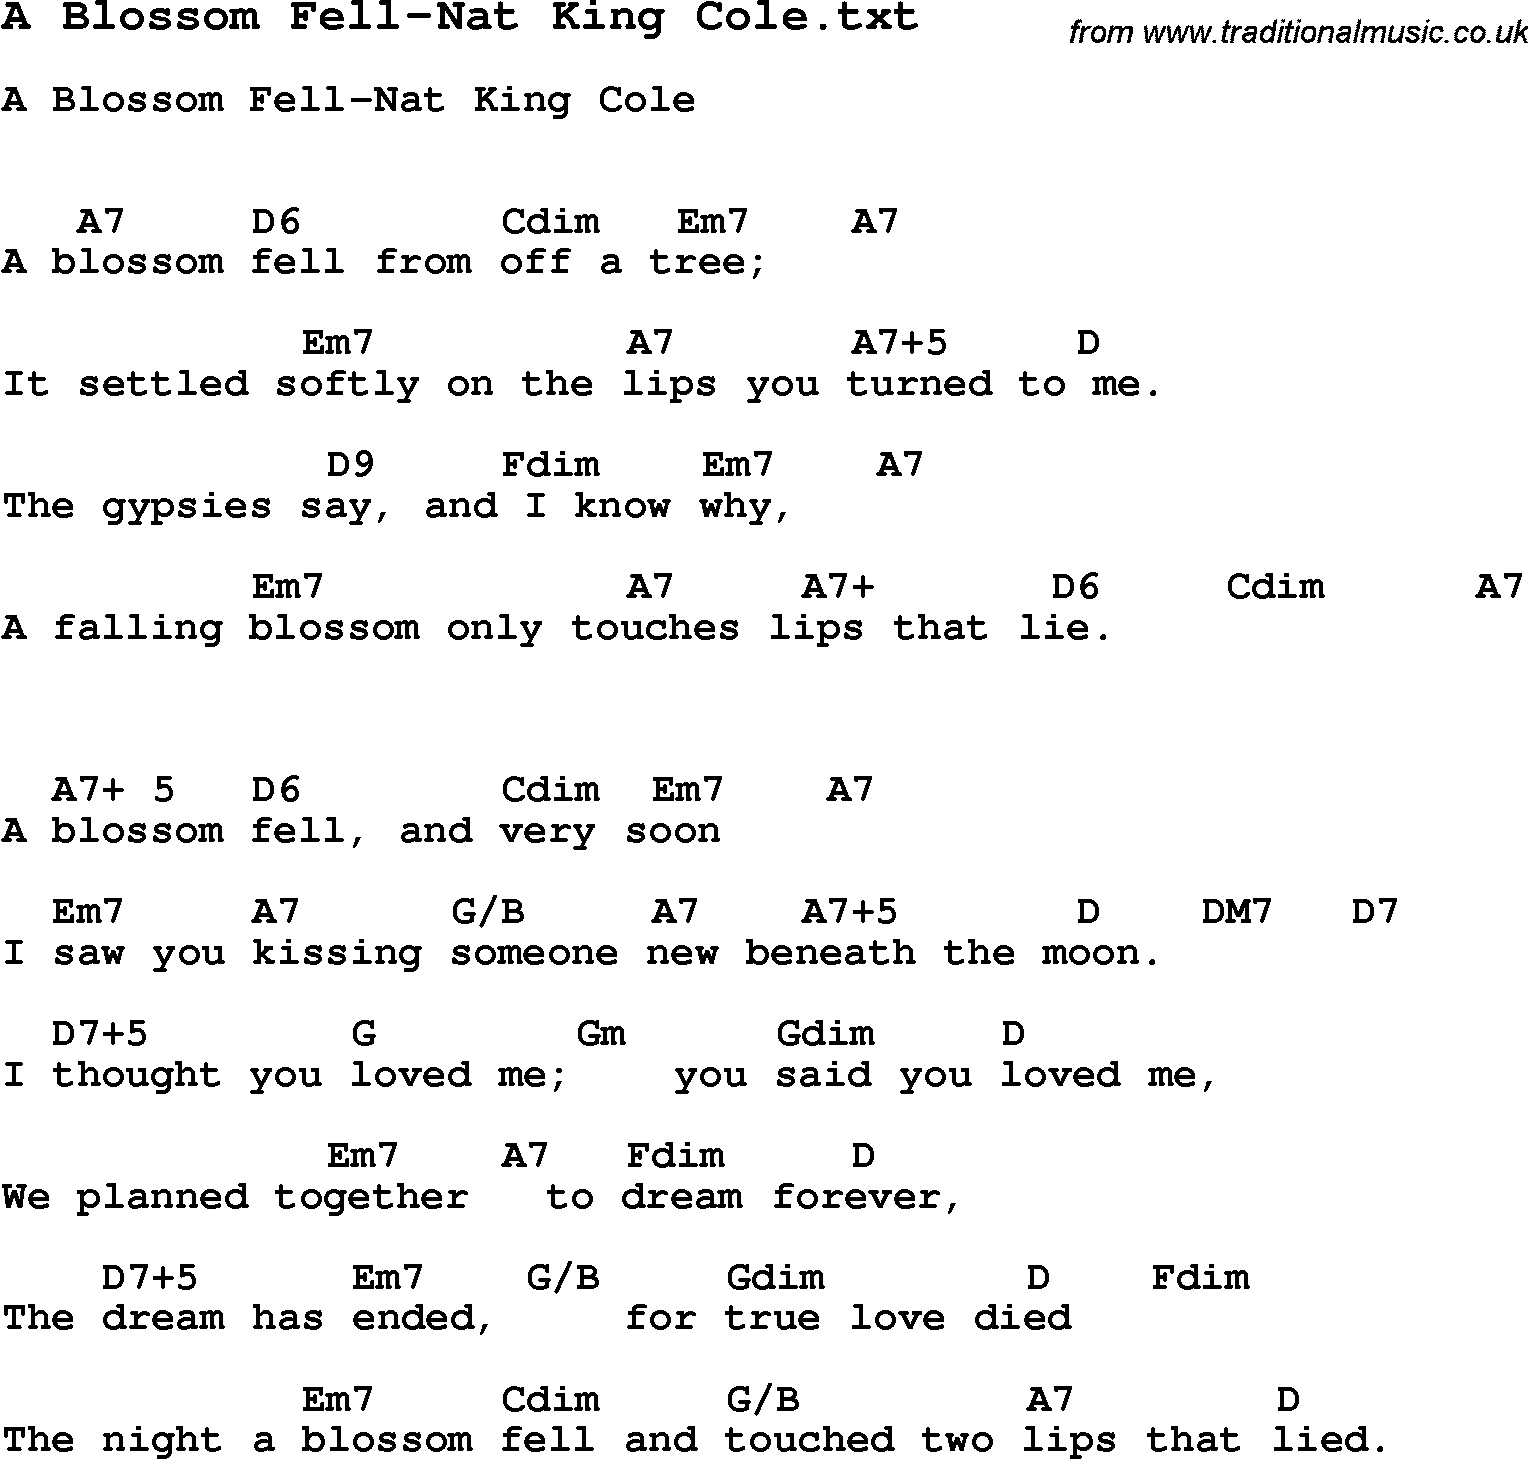 Jazz Song - - A Blossom Fell-Nat King Cole with Chords, Tabs and Lyrics from top bands and artists